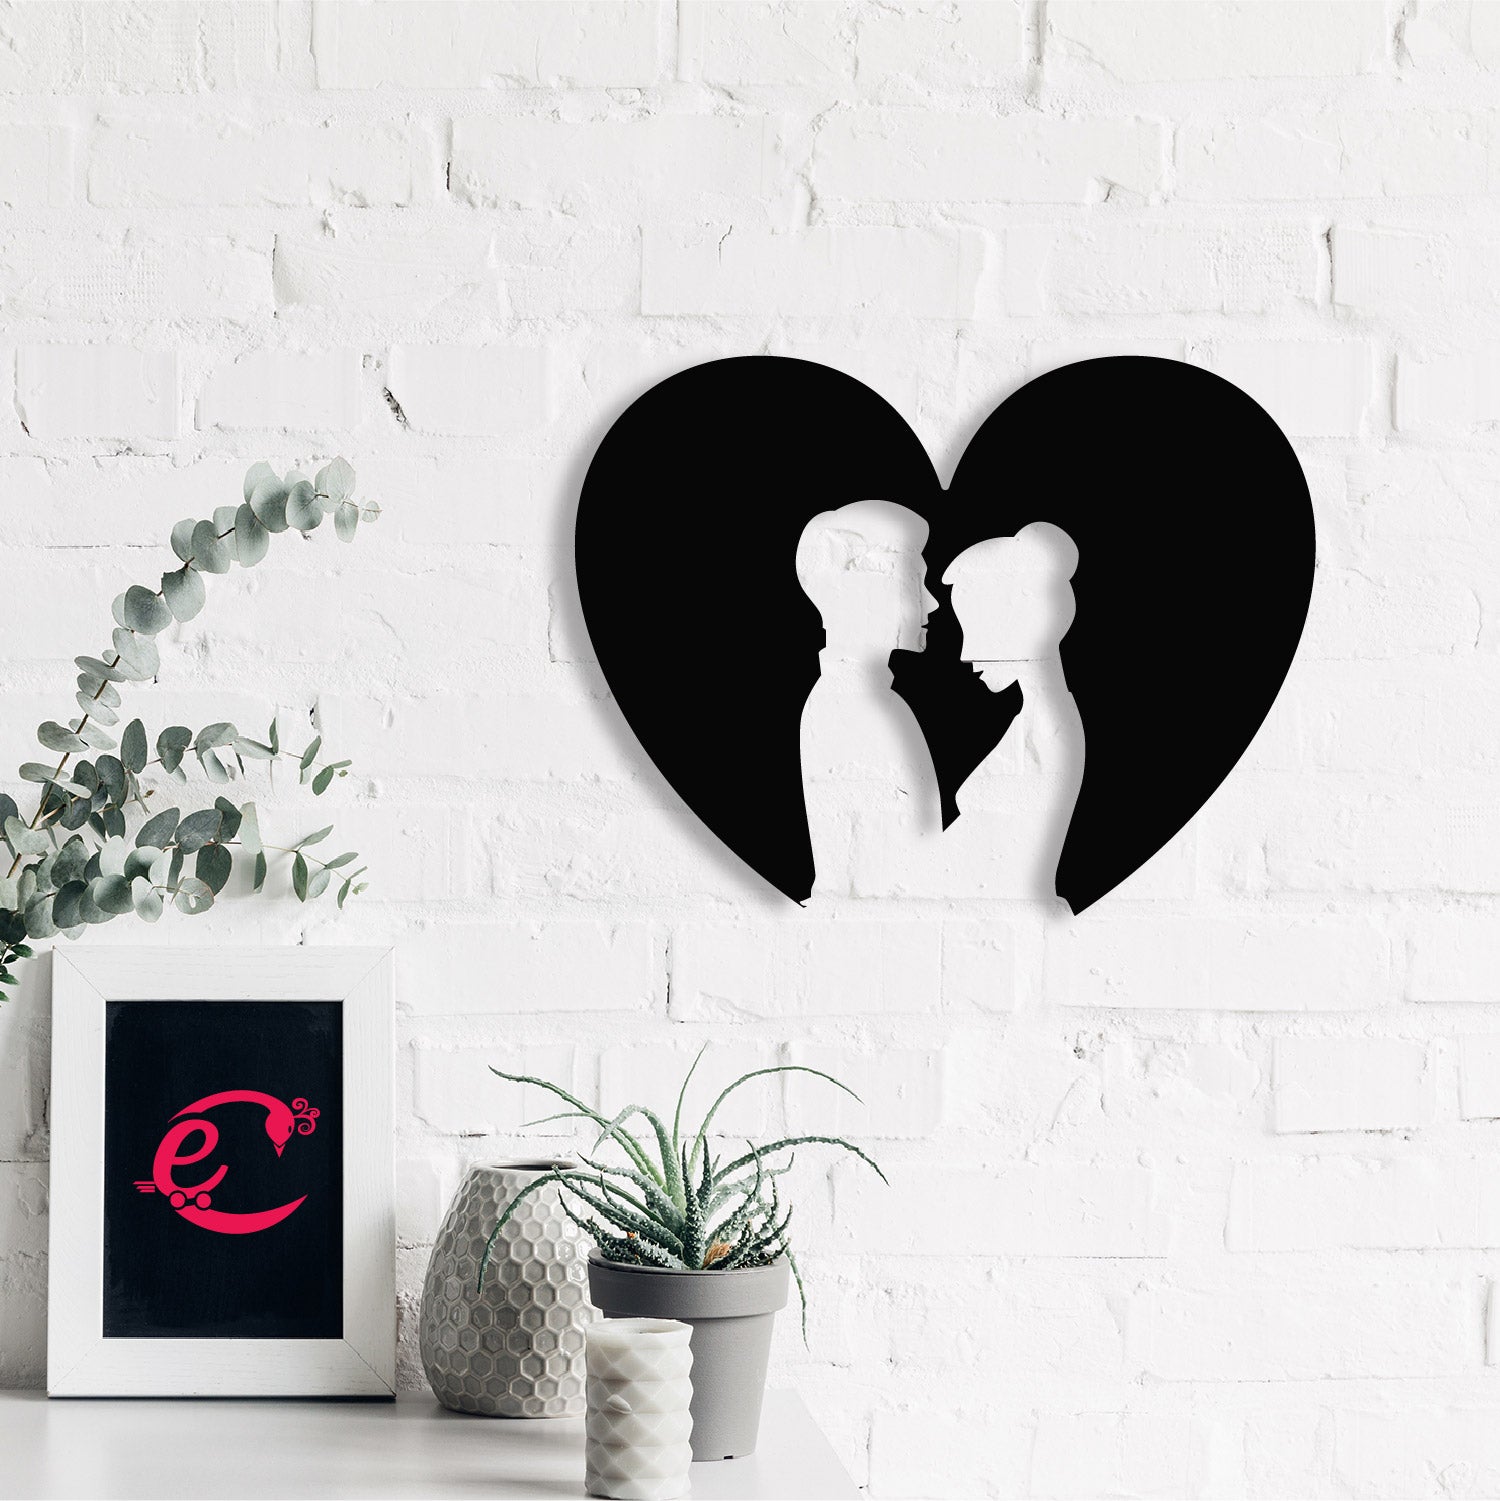 Loving Couple Carved out from Heart Black Engineered Wood Wall Art Cutout, Ready to Hang Home Decor